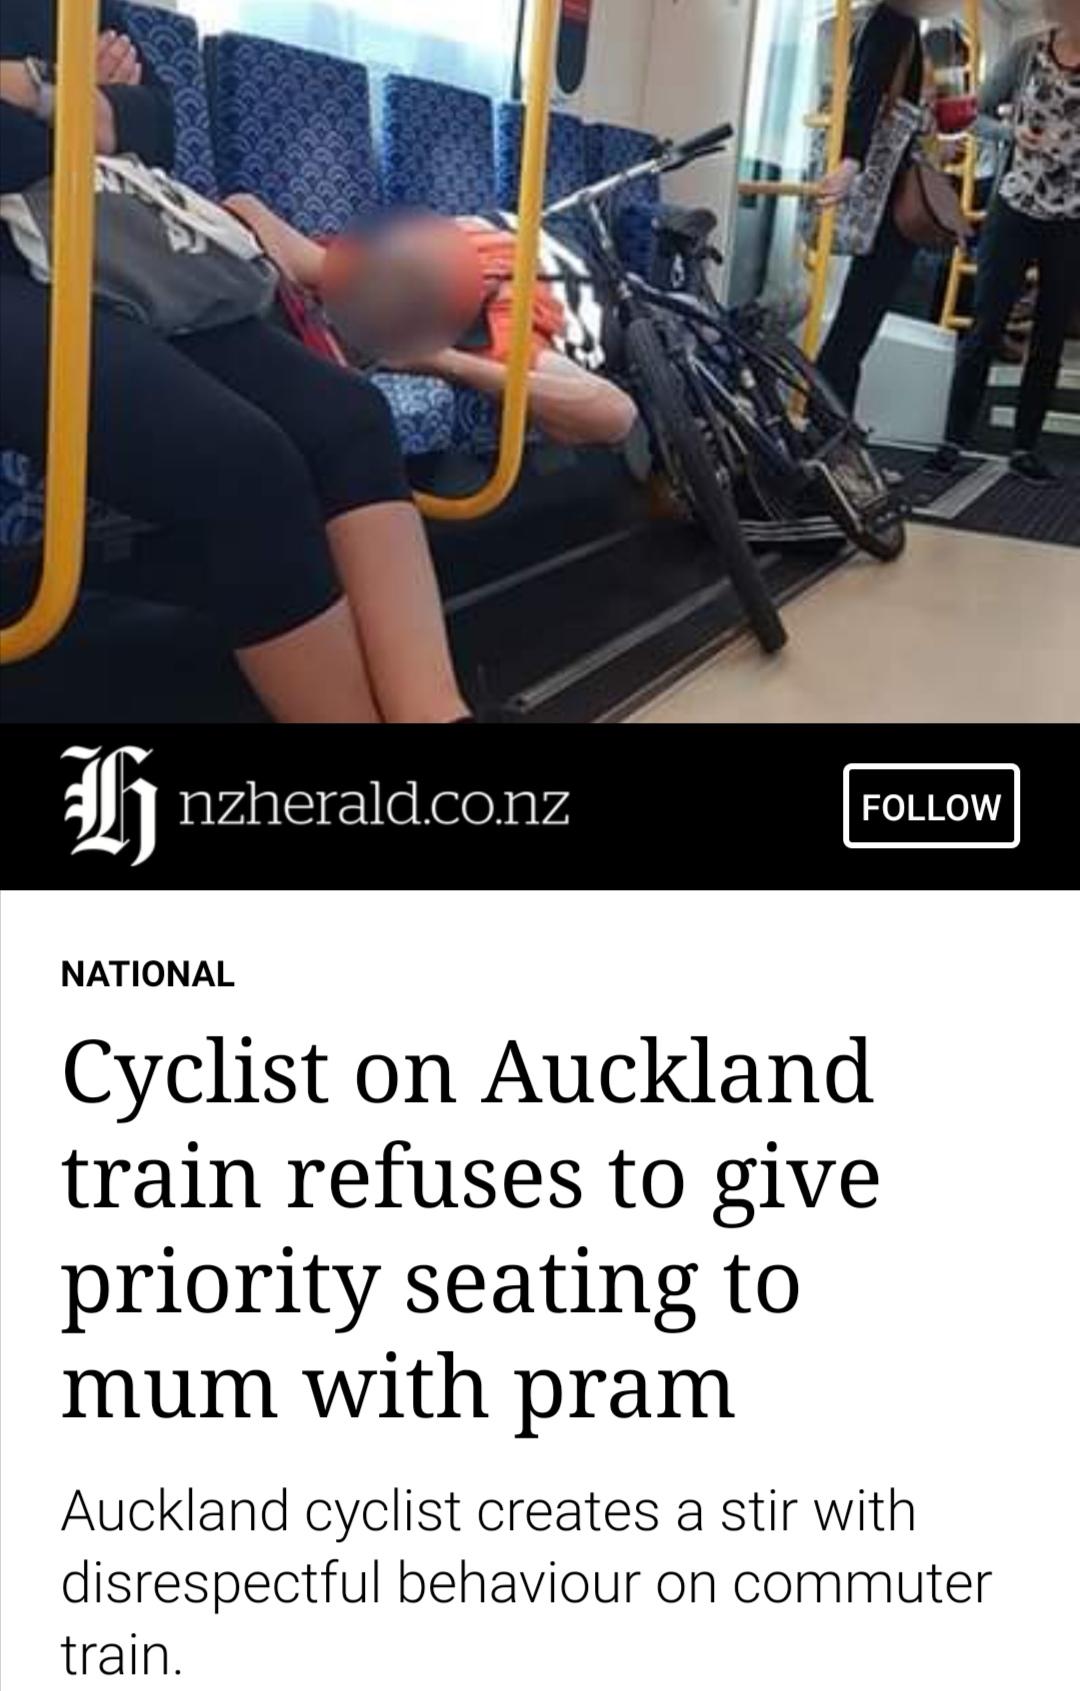 shoulder - Hh nzherald.co.nz National Cyclist on Auckland train refuses to give priority seating to mum with pram Auckland cyclist creates a stir with disrespectful behaviour on commuter train.